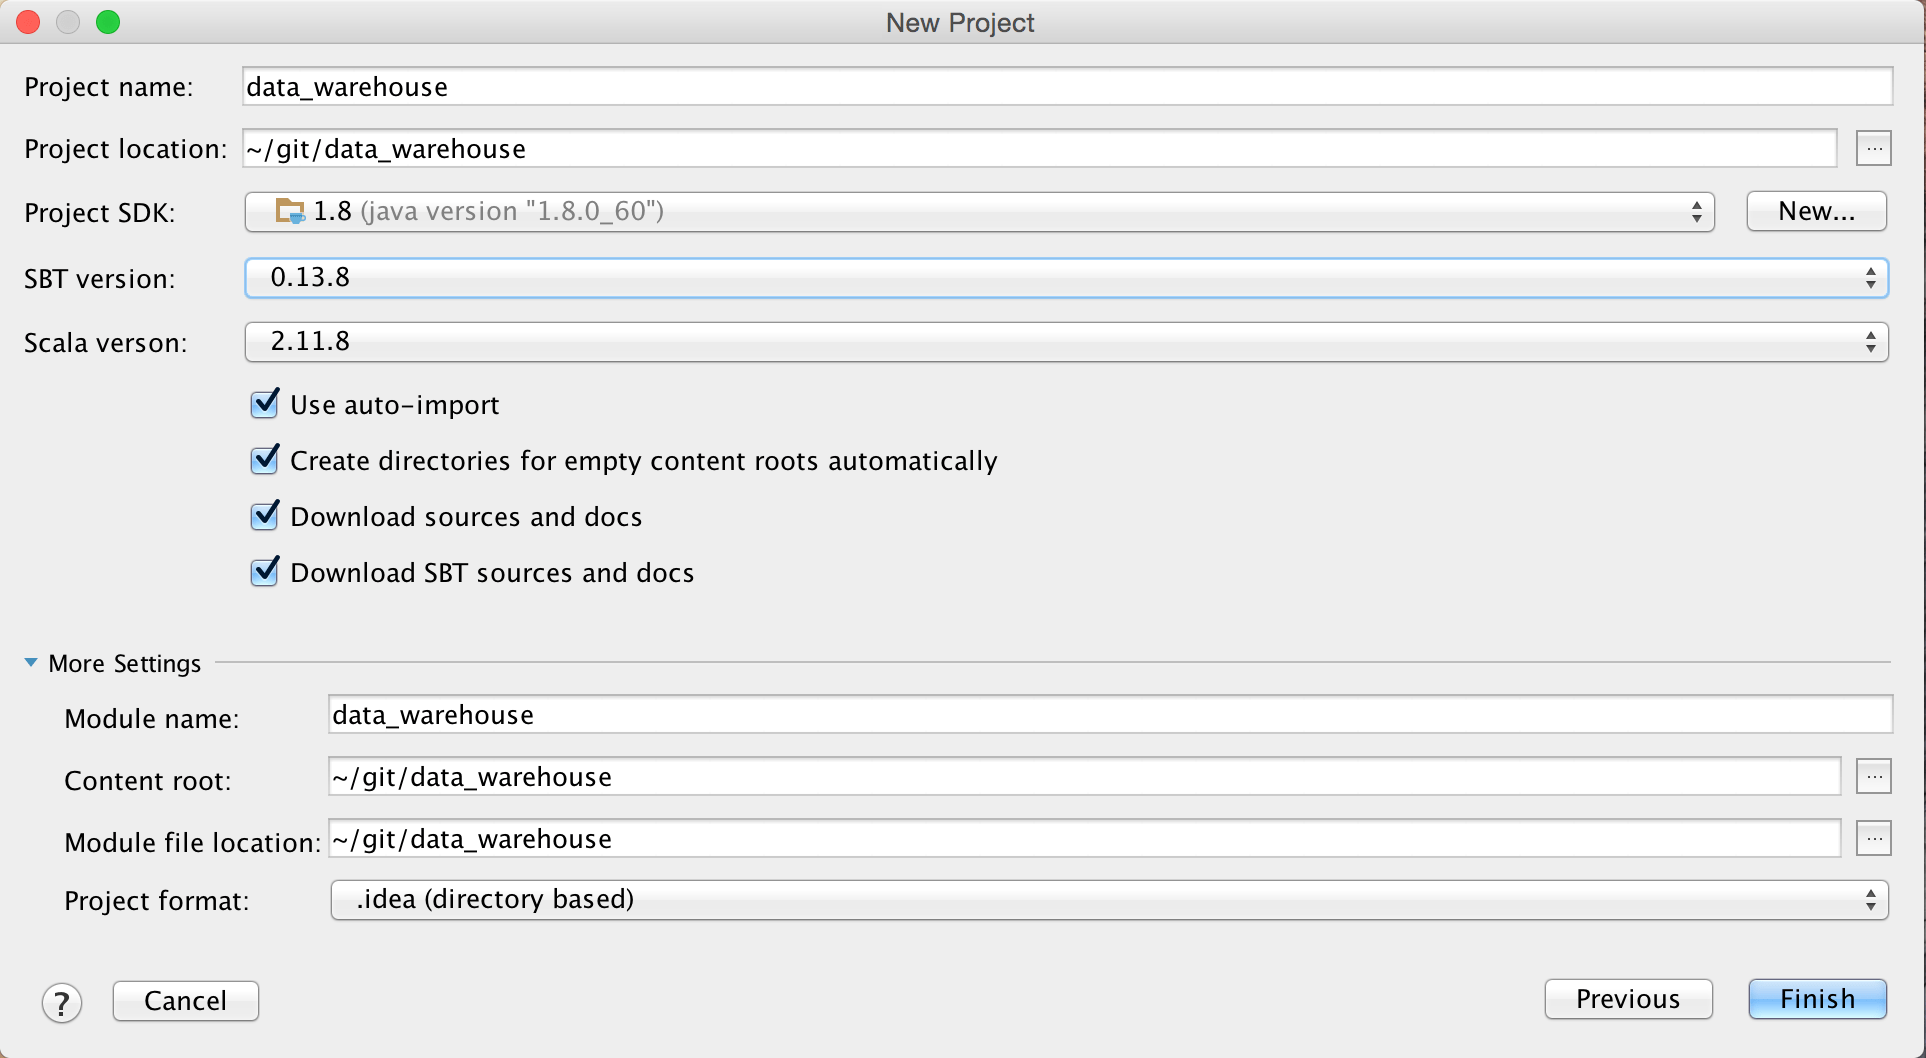 A screenshot of the New Project dialog in IntelliJ